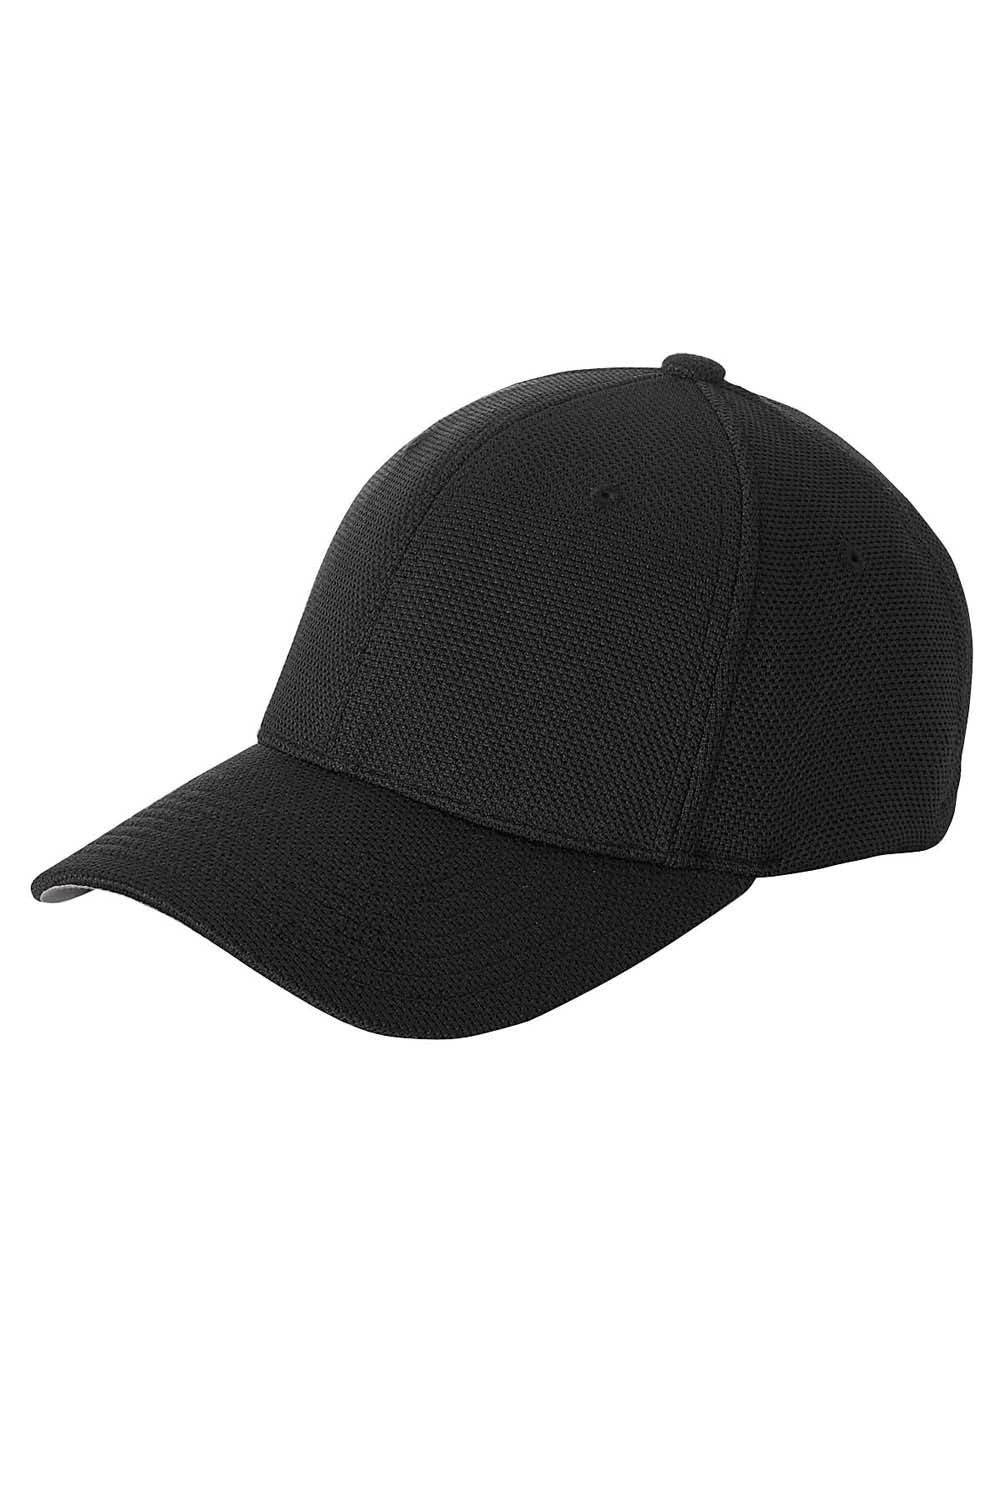 Flexfit 6577CD Mens Cool & Dry Moisture Wicking Stretch Fit Hat Black Front